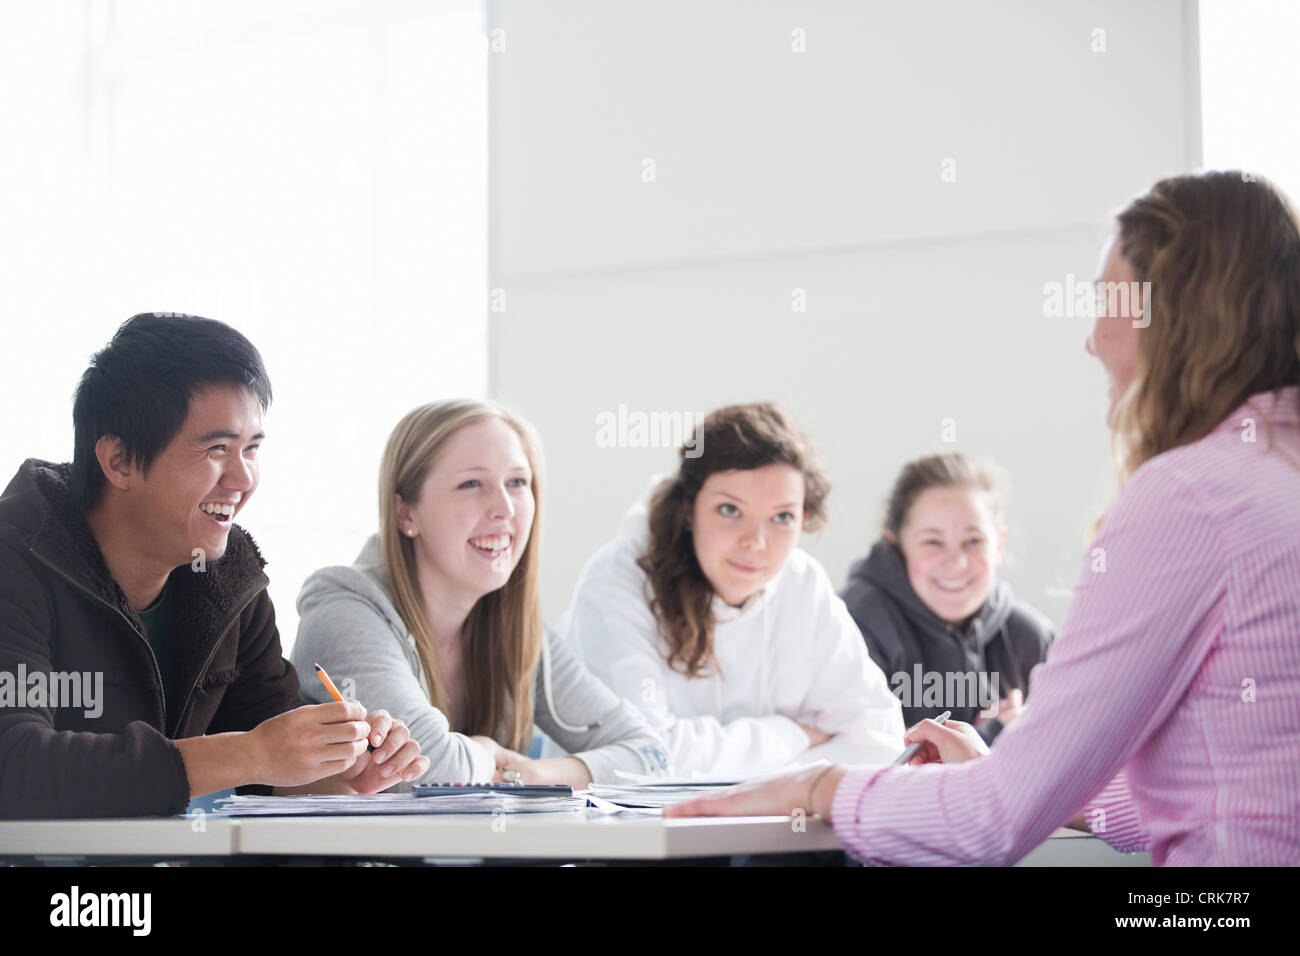 Teacher talking to students in class Stock Photo